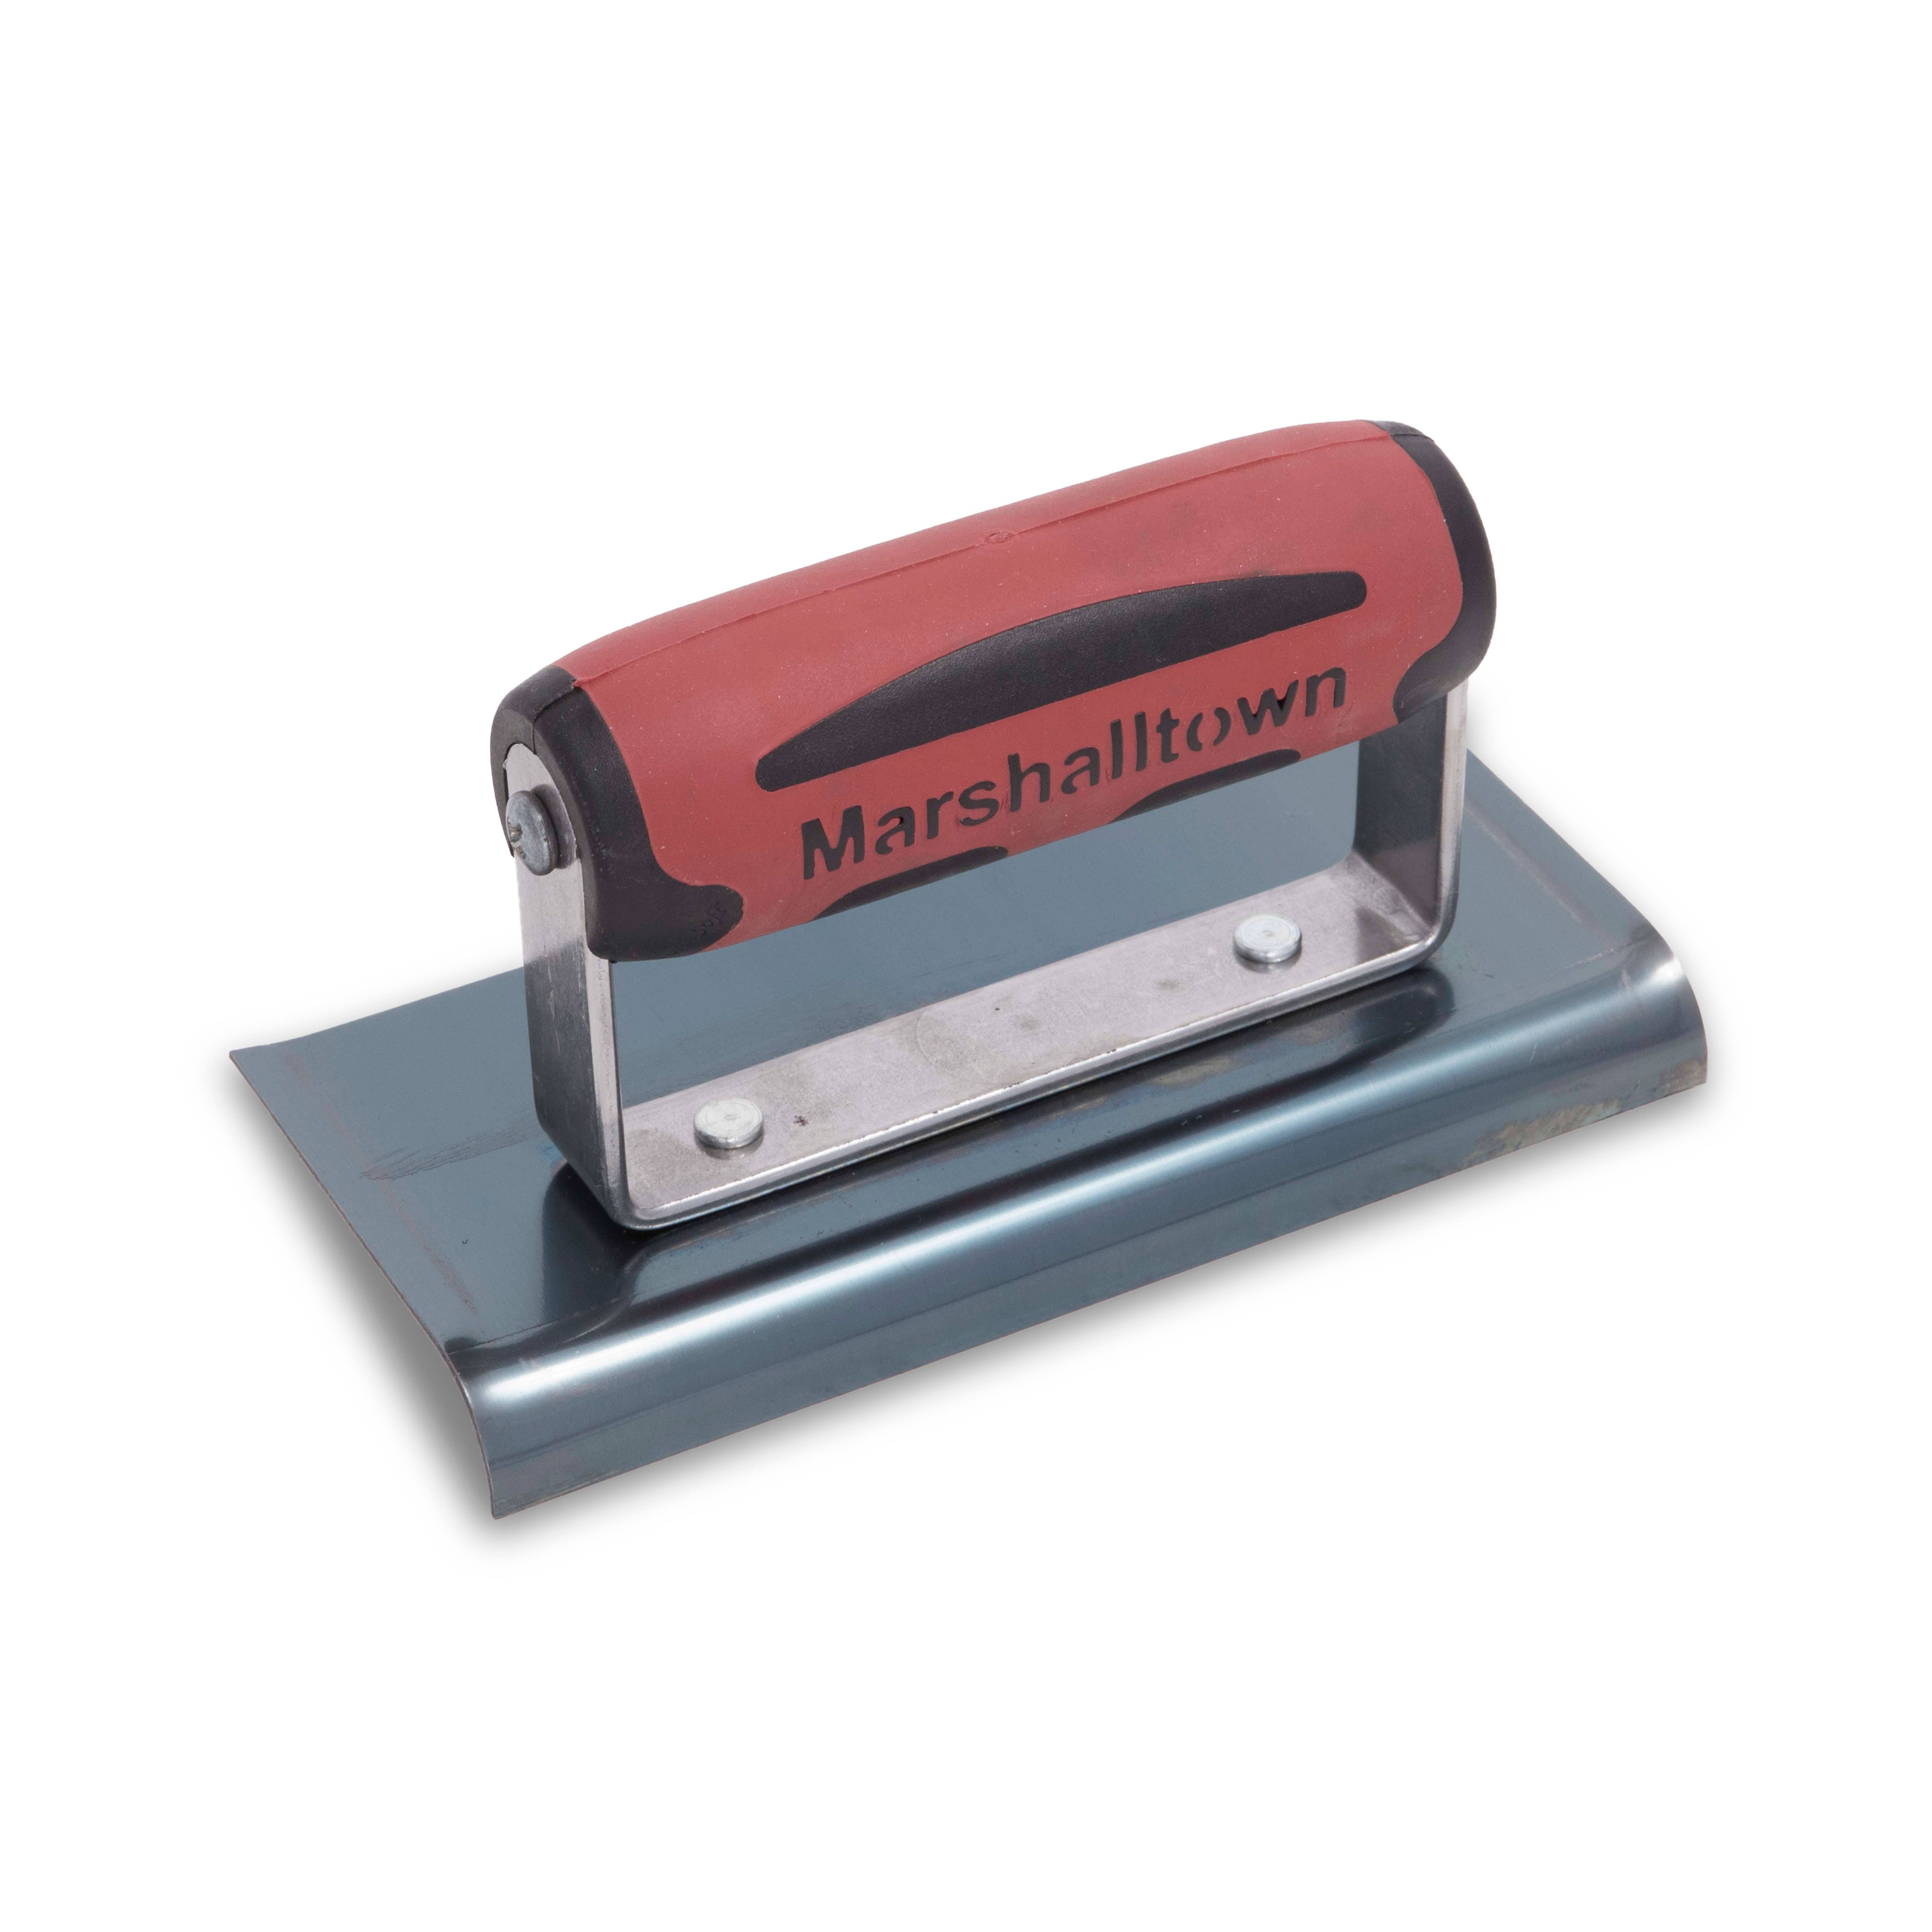 Marshalltown 121BD Concrete Curved Ends Edger - 6" x 3"